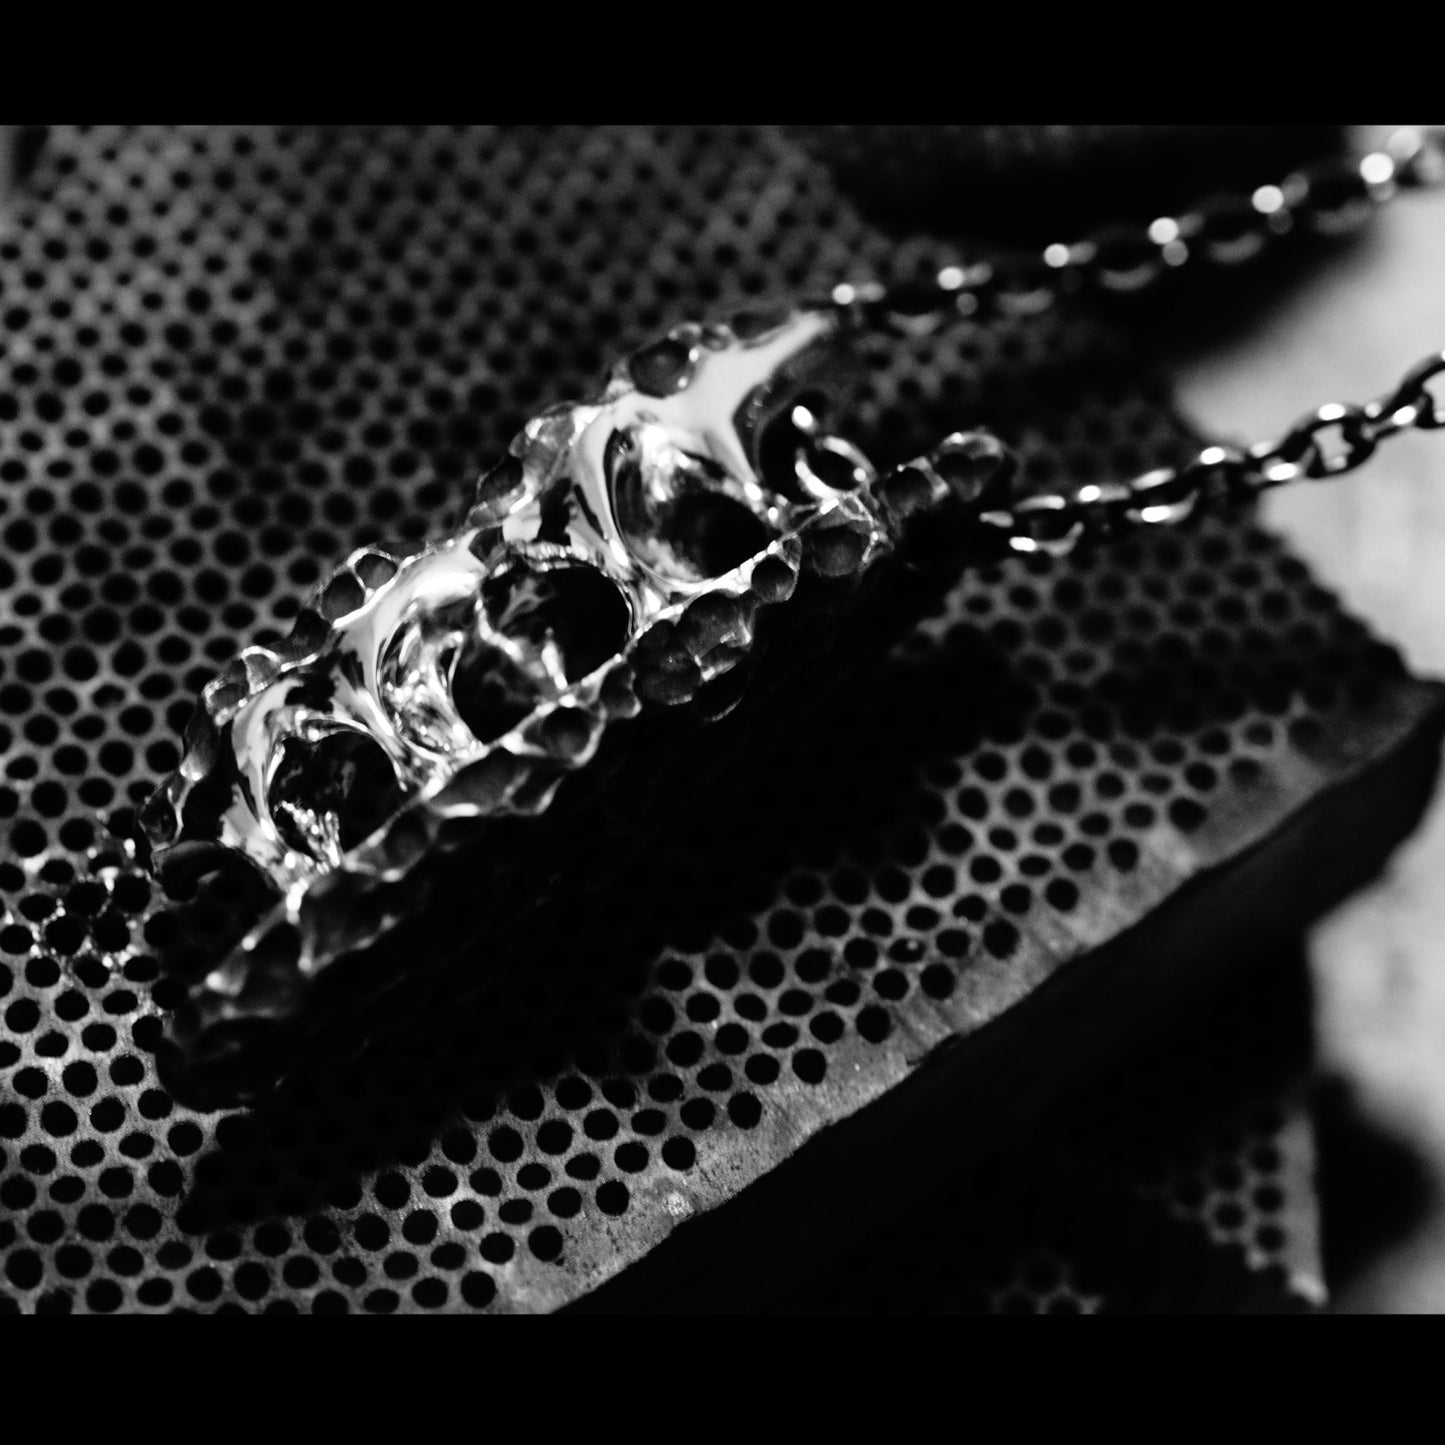 PED42 Eternal - Silver necklace with original clasp of 60cm